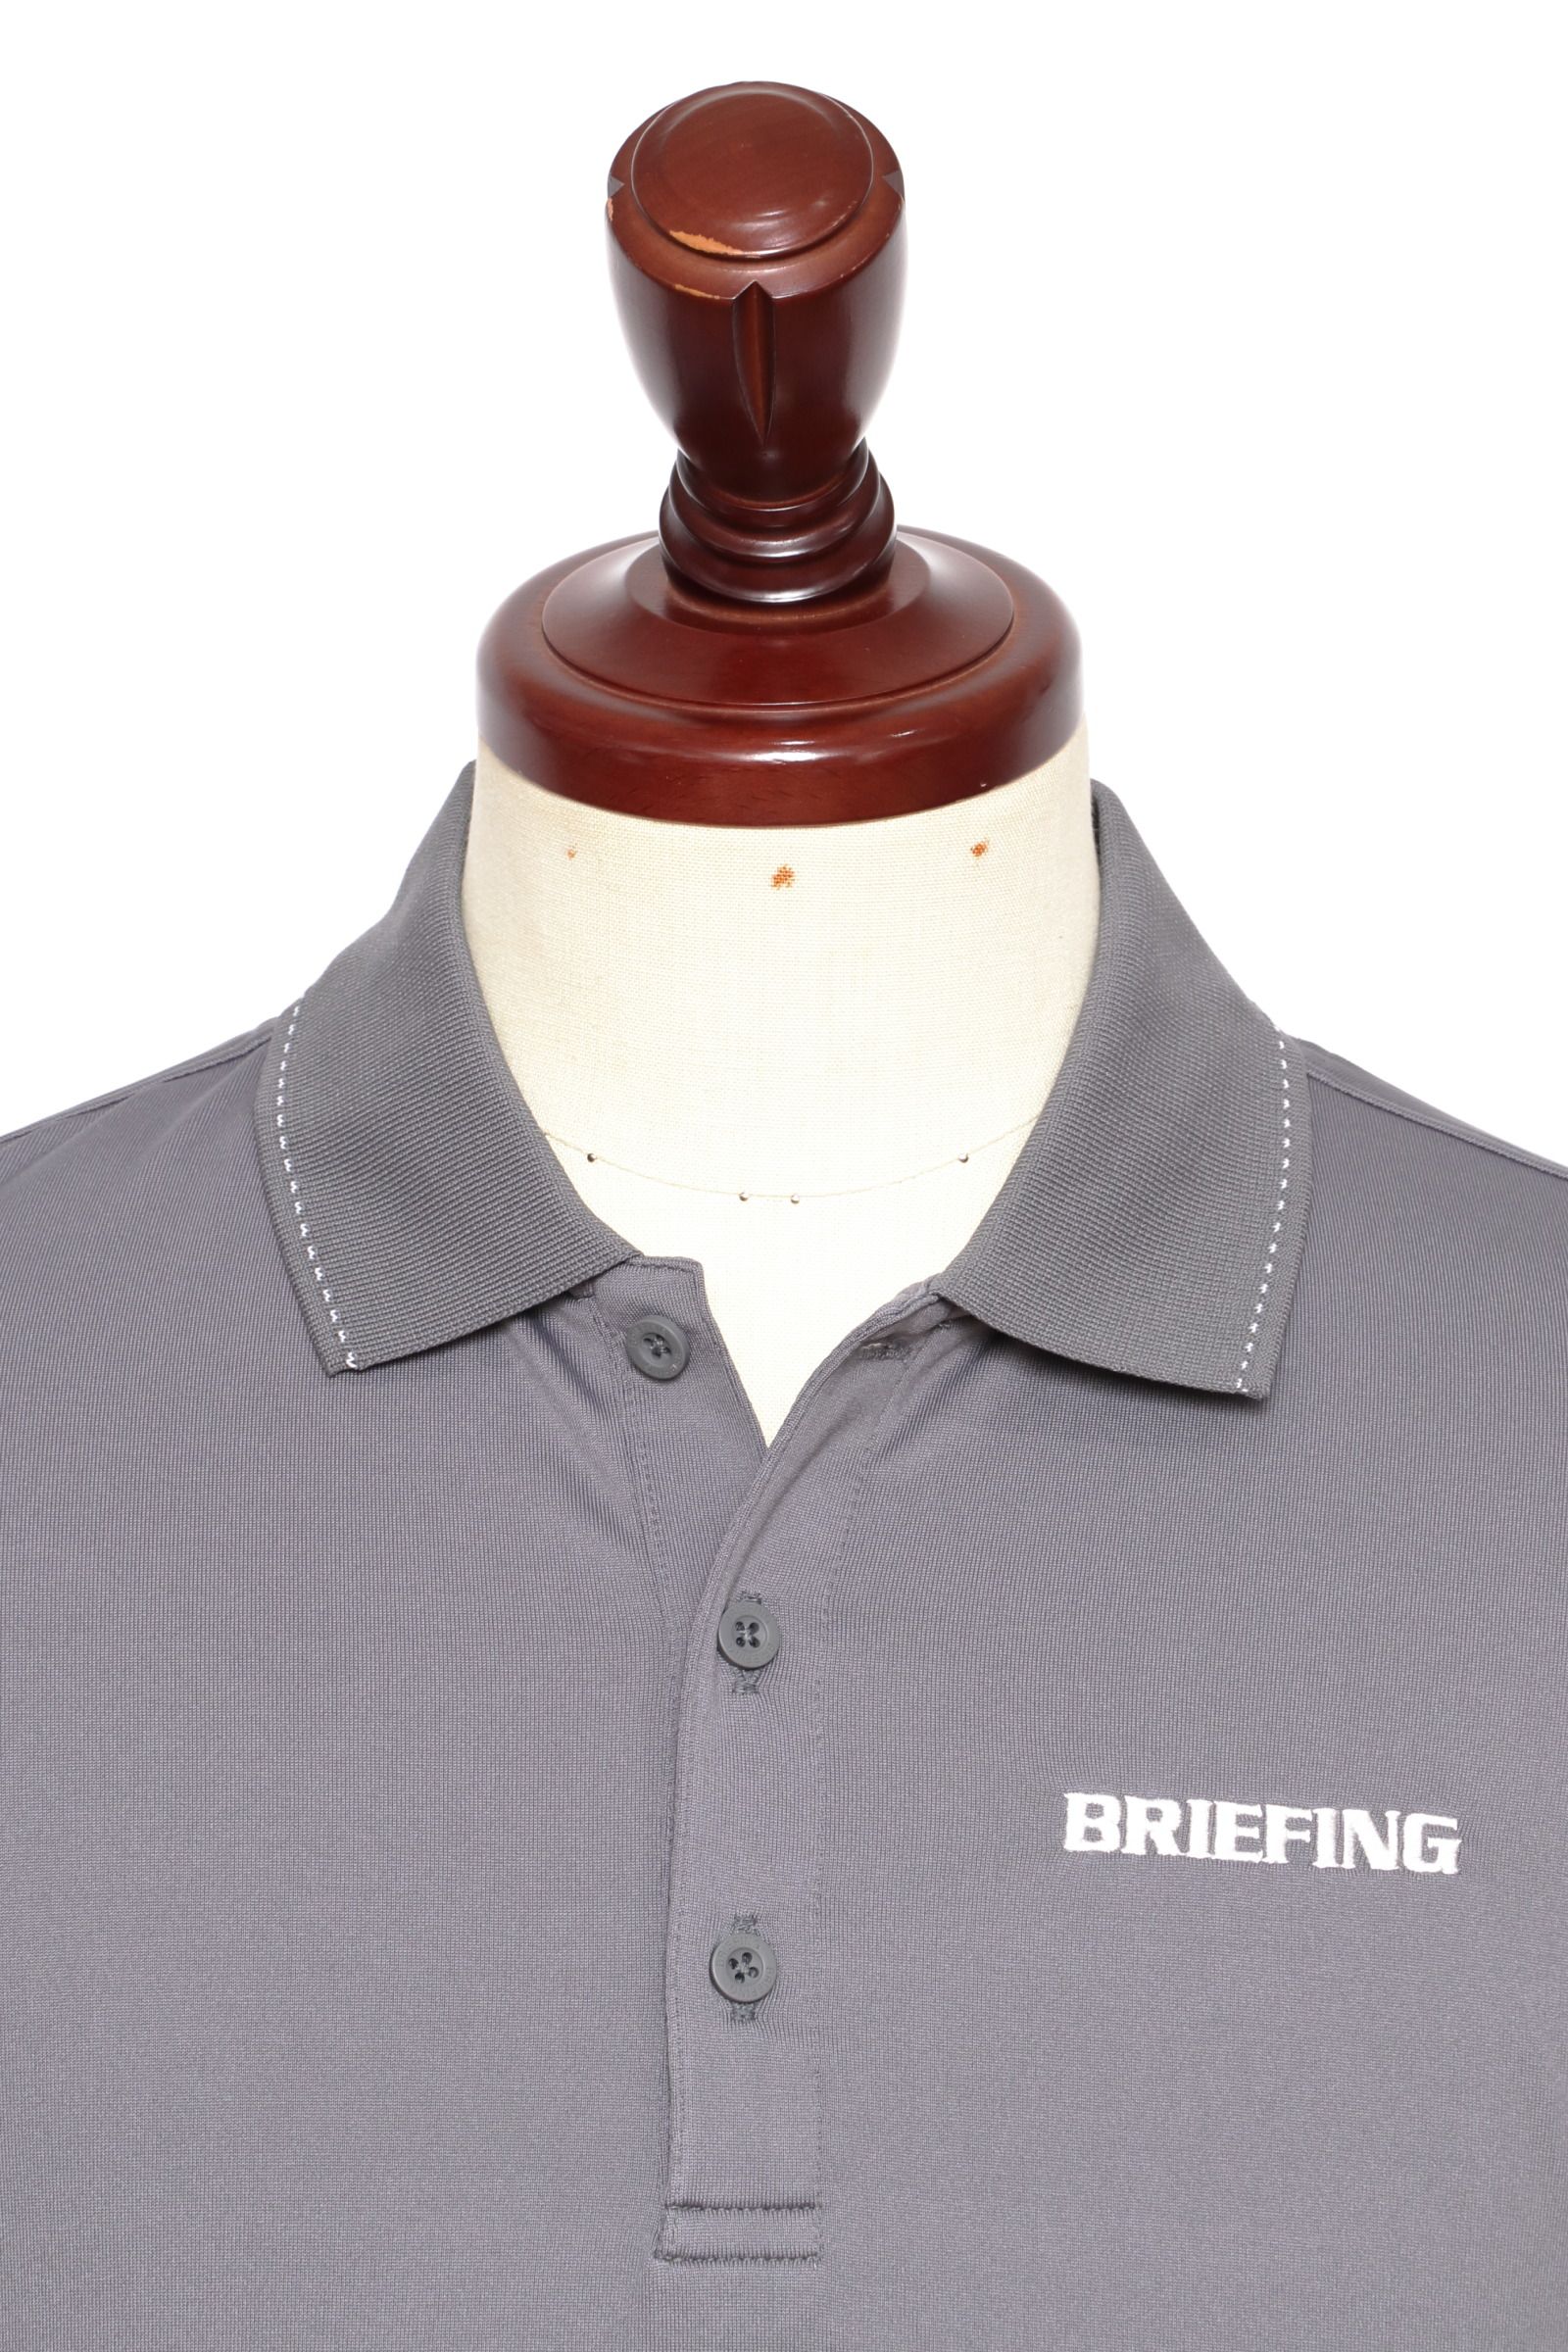 BRIEFING GOLF - MENS TOUR POLO ストレッチナイロン ポロ / グレー ...